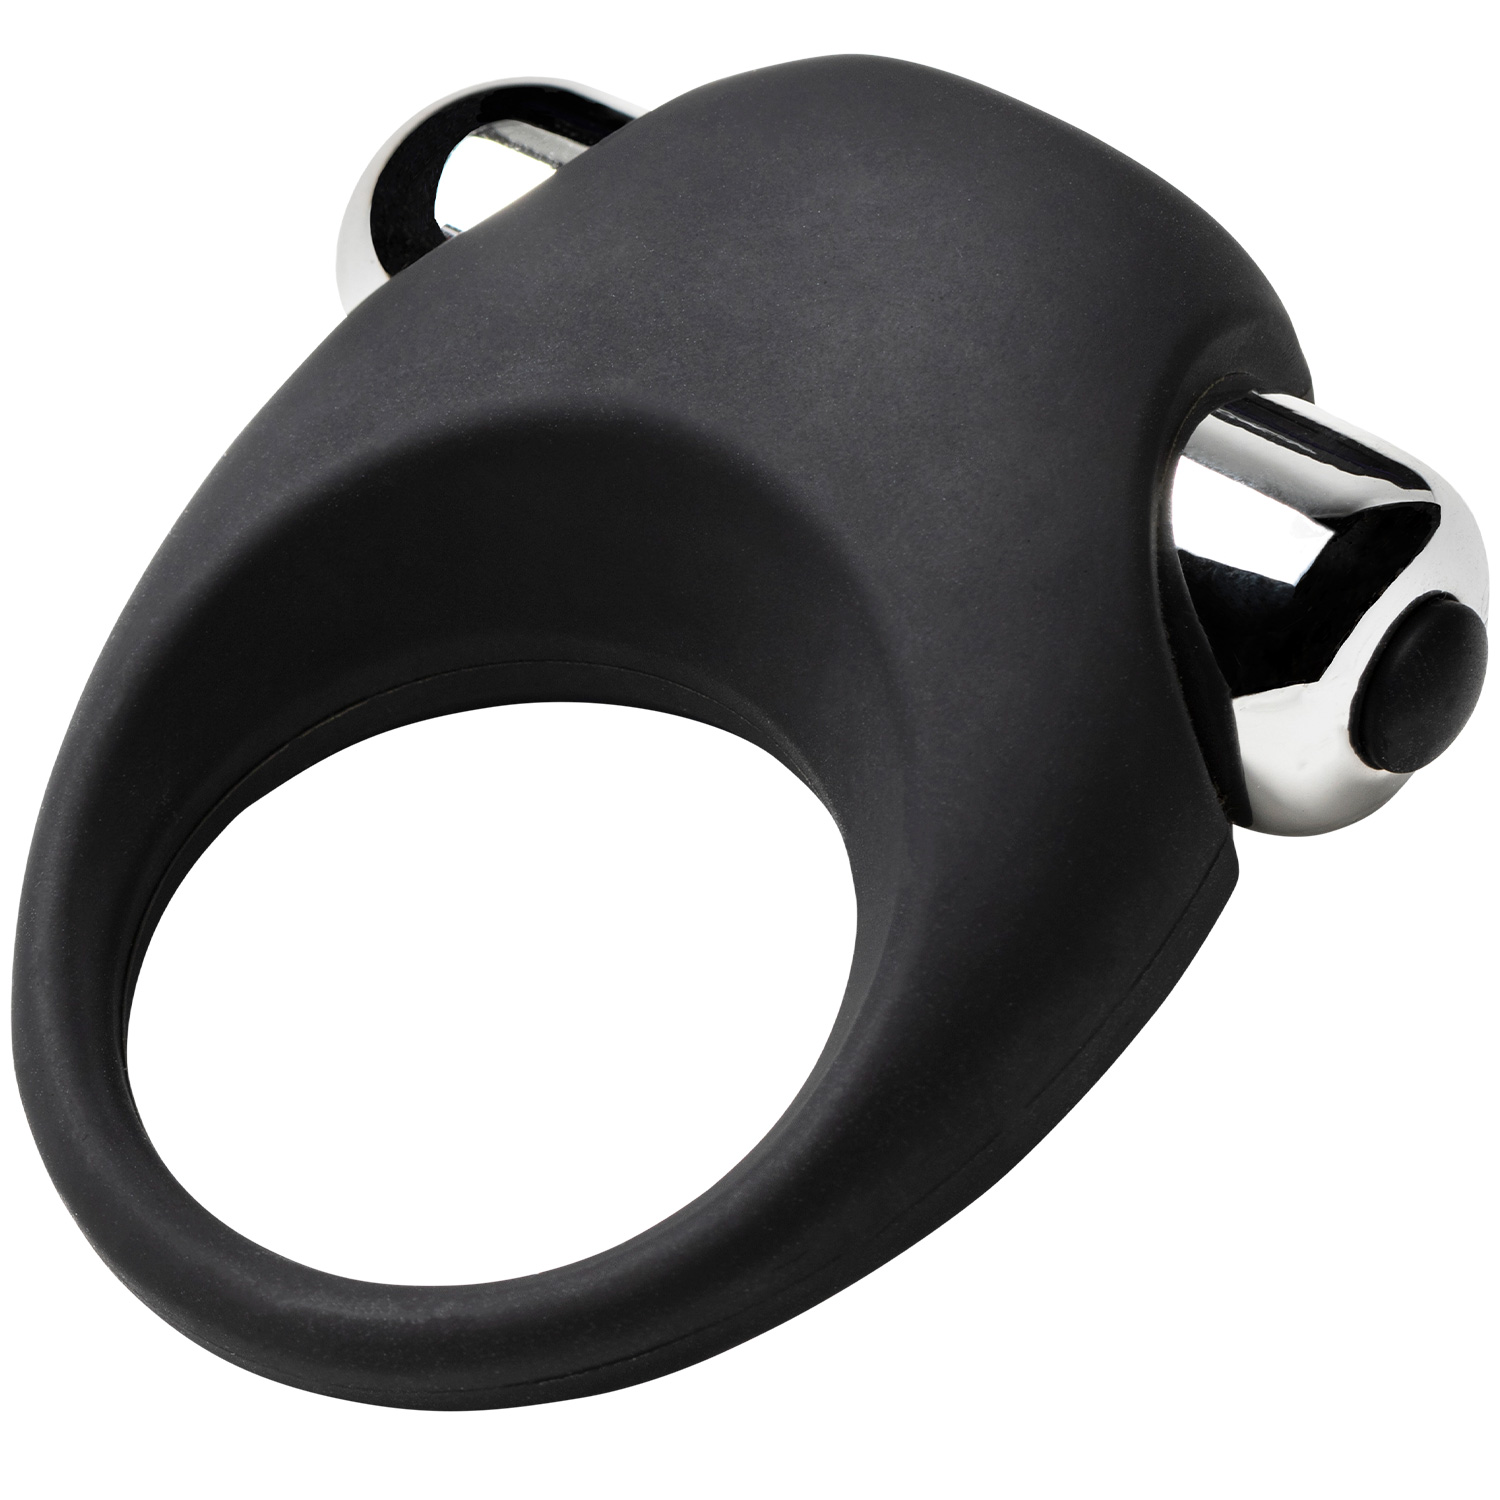 21285-sinful-powerful-vibrating-love-ring-q100-03